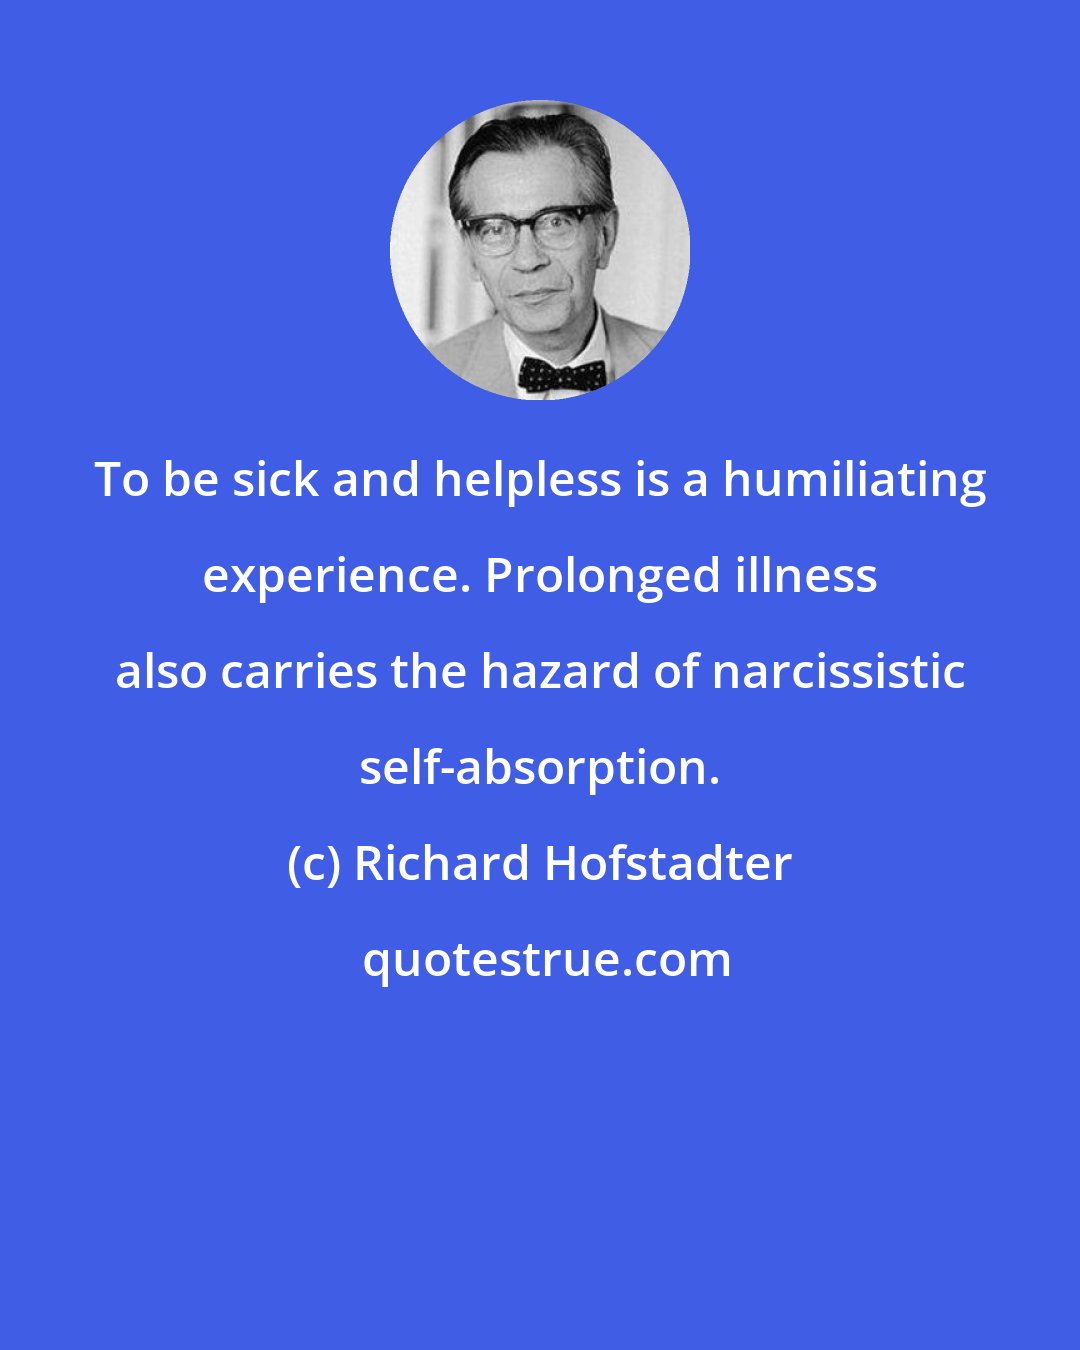 Richard Hofstadter: To be sick and helpless is a humiliating experience. Prolonged illness also carries the hazard of narcissistic self-absorption.